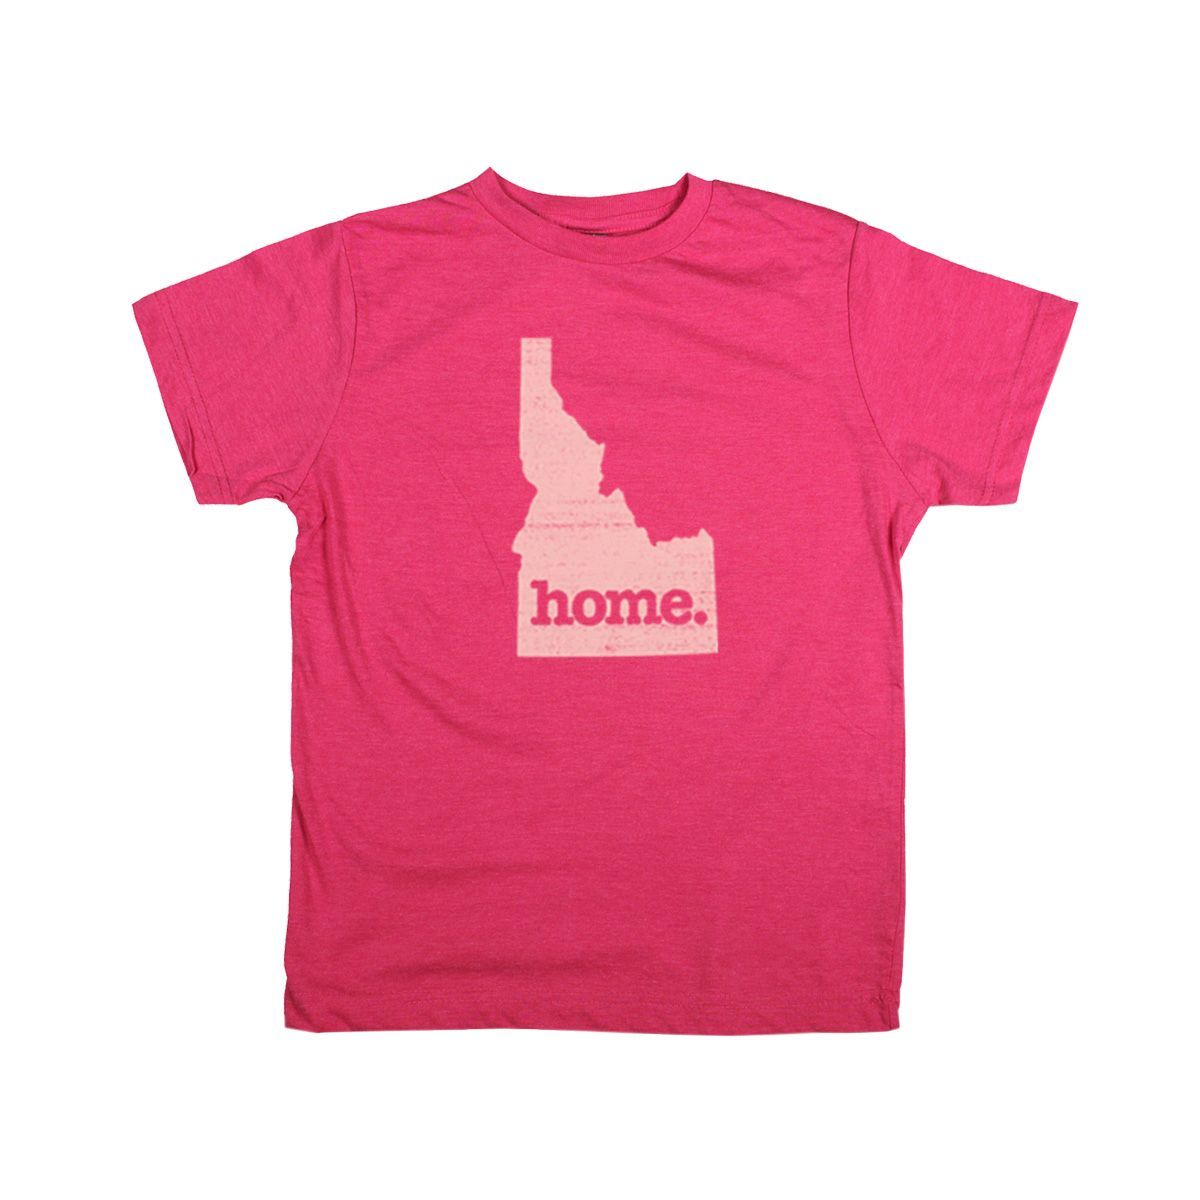 home. Youth/Toddler T-Shirt - Oregon